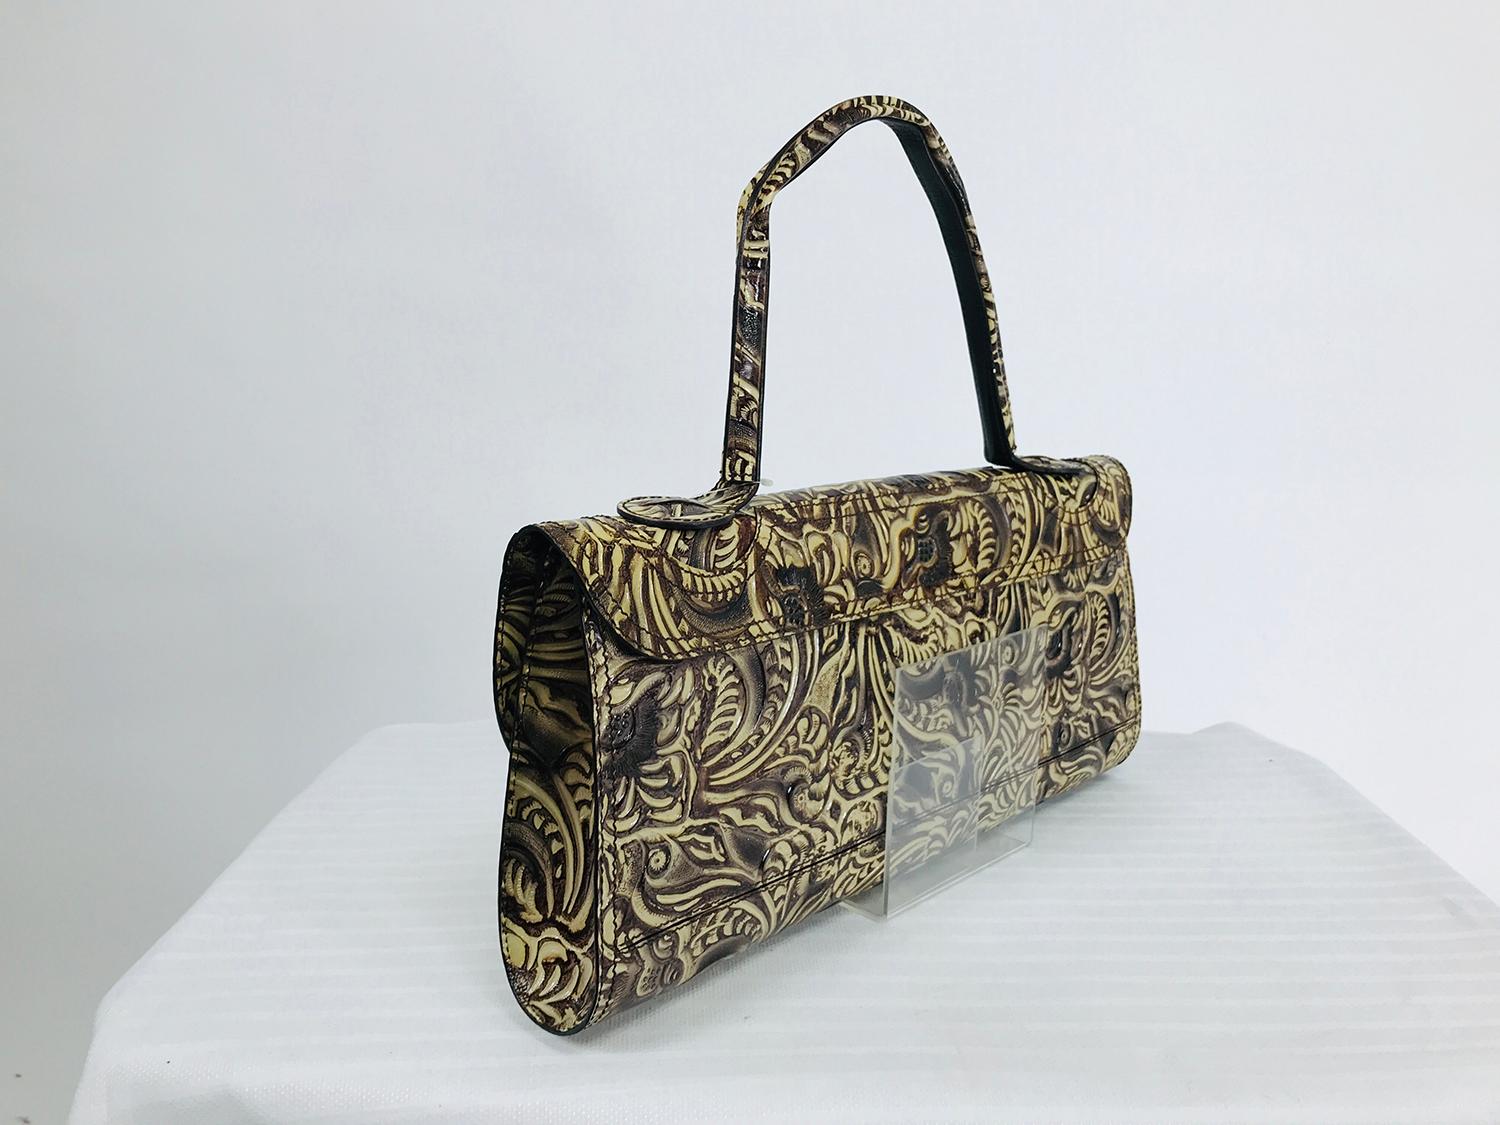 Fendi flap front, wide brown & cream tooled leather shoulder bag or clutch with tags. Rectangular bag has a flap front with hidden magnetic closure, top handle can be carried on the shoulder. The bags tooled design ads a three dimensional look &